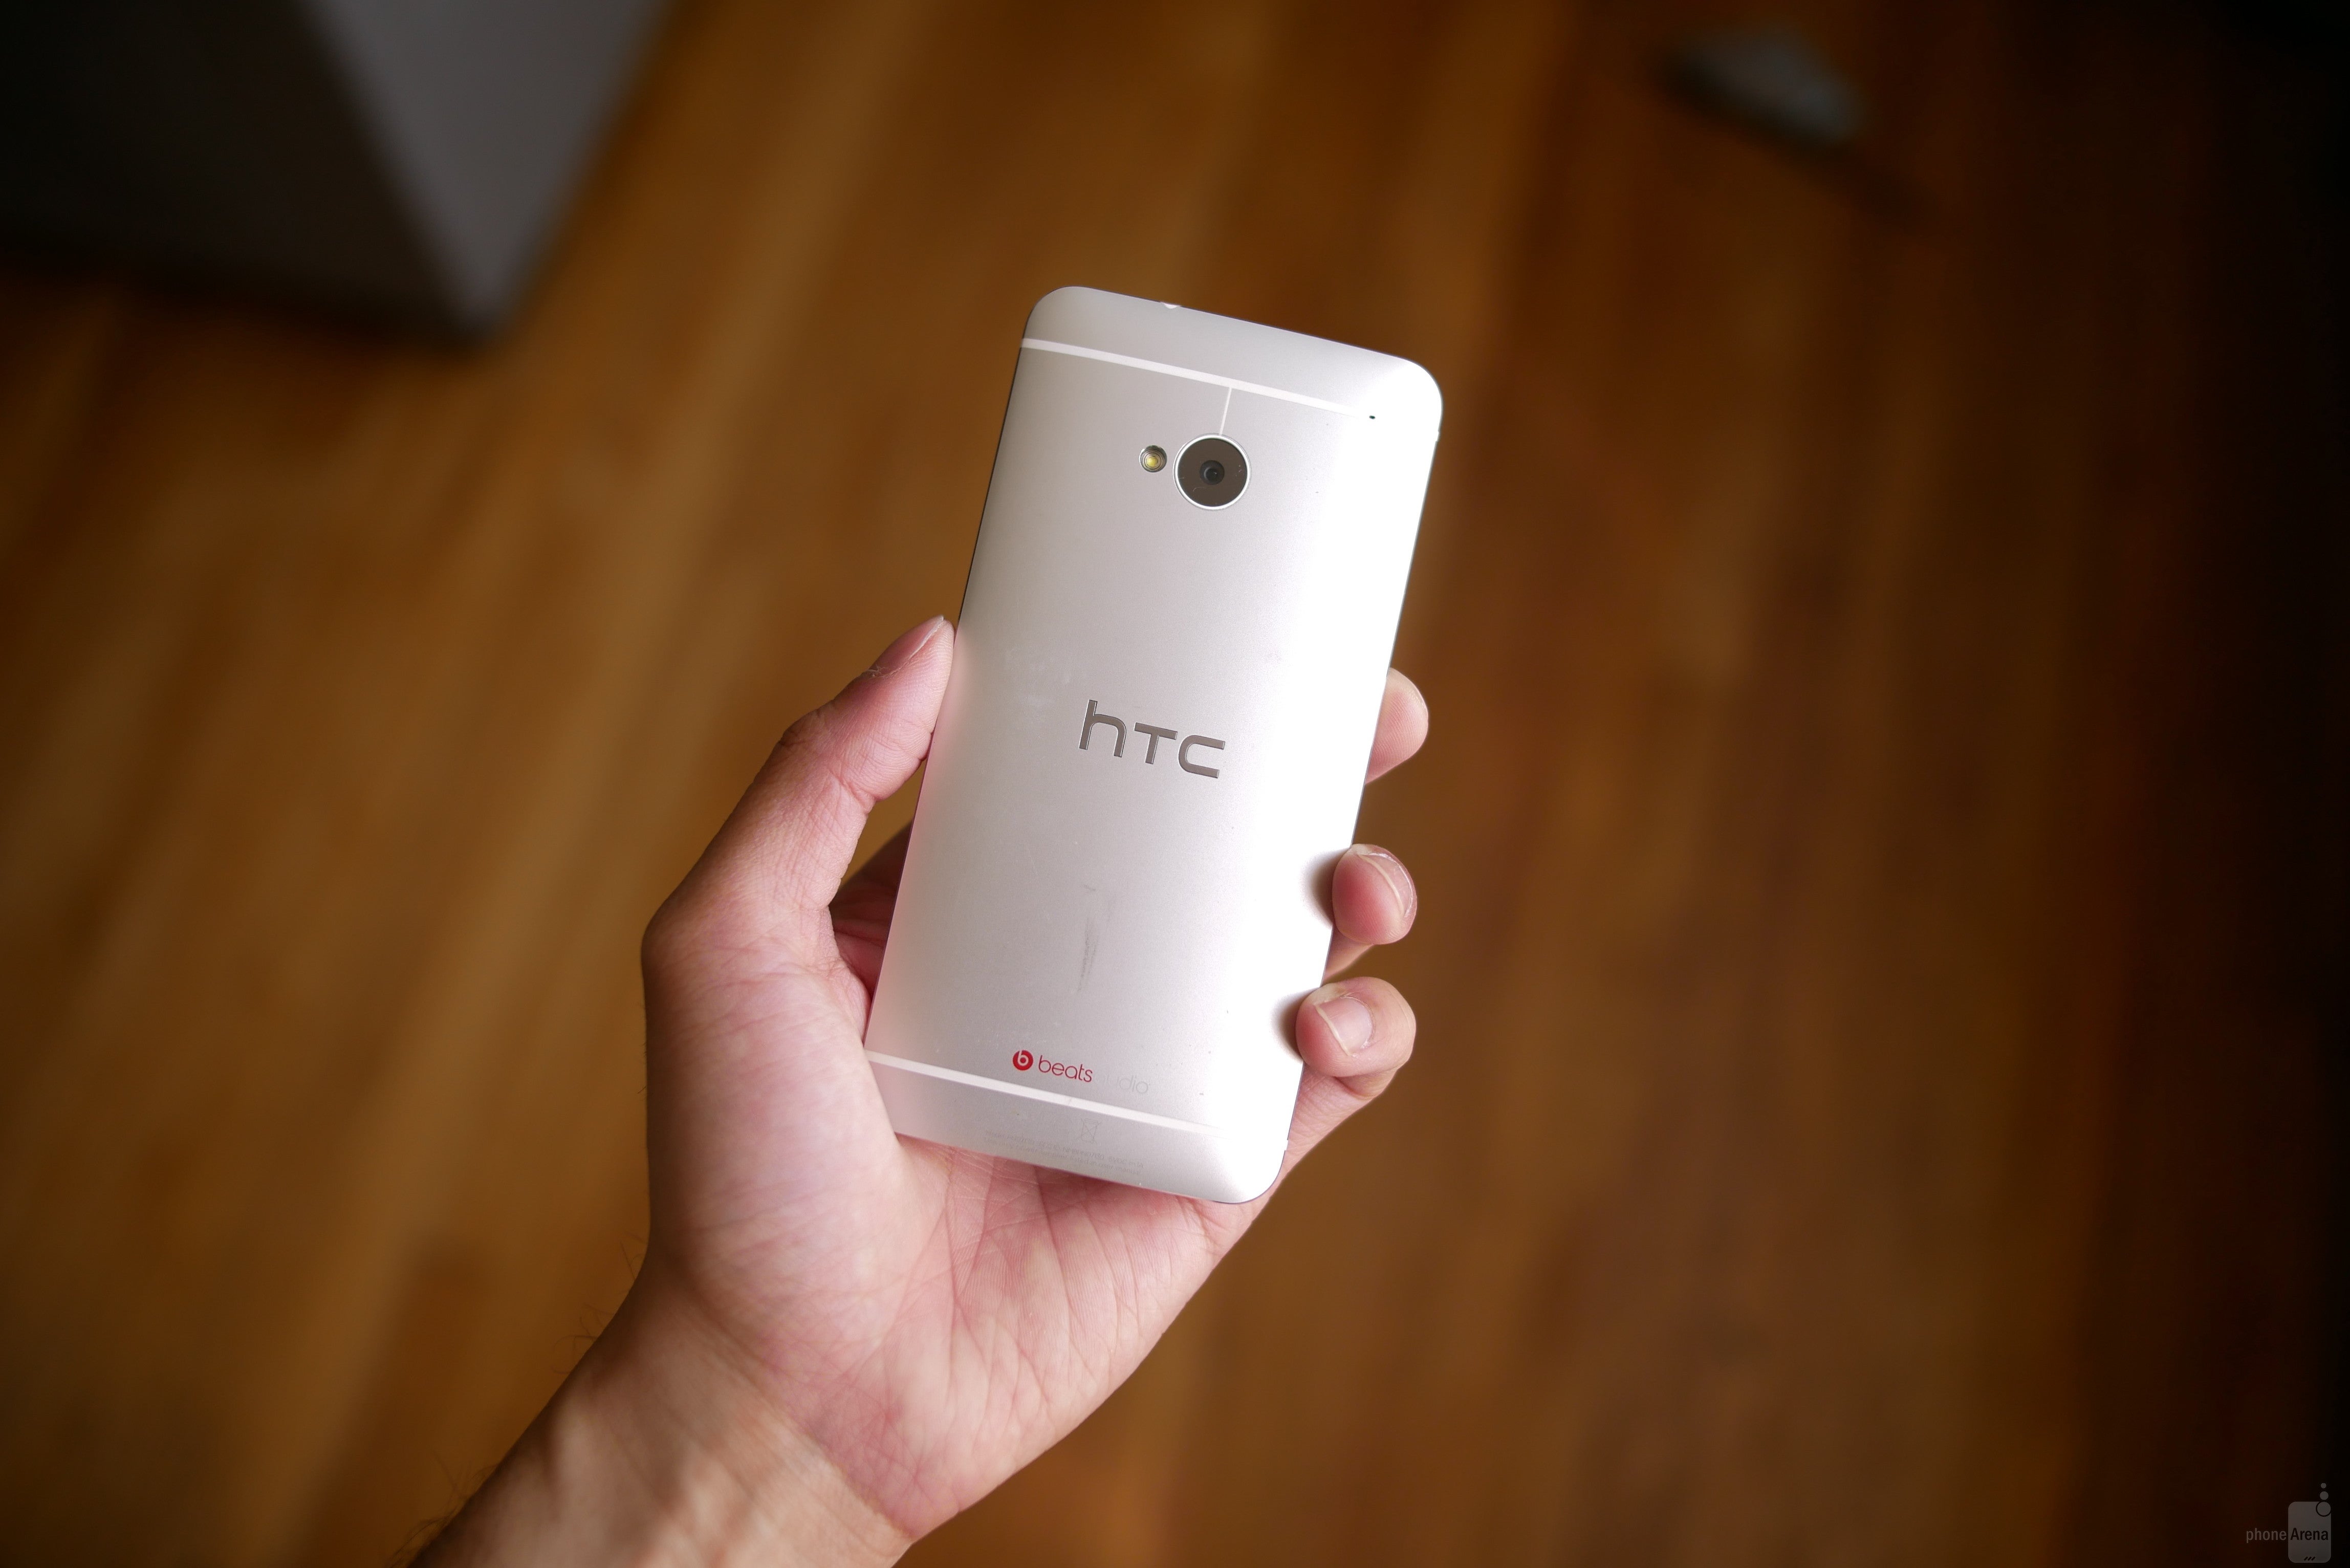 The HTC One M7 is highly regarded as one of the all-time, best designed phones. - A look back at the evolution of HTC's smartphone designs